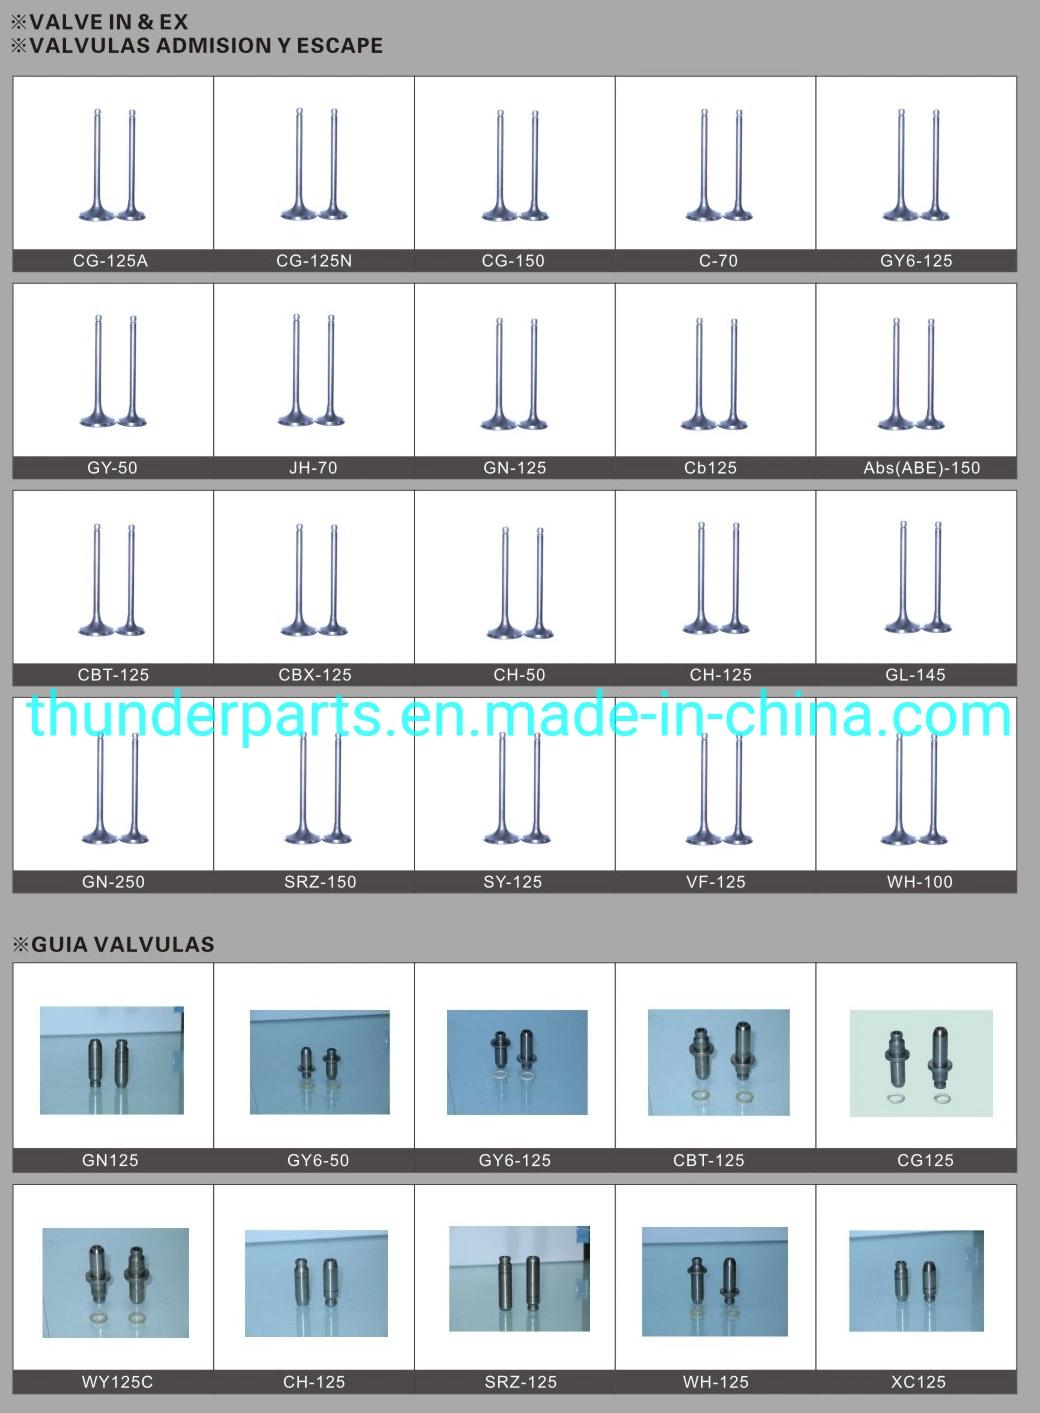 Motorcycle Accessories Motorcycle Engine Valves in & Ex for Scooter Parts, Gy6 50/125/150 An125, Wh125, Keeway